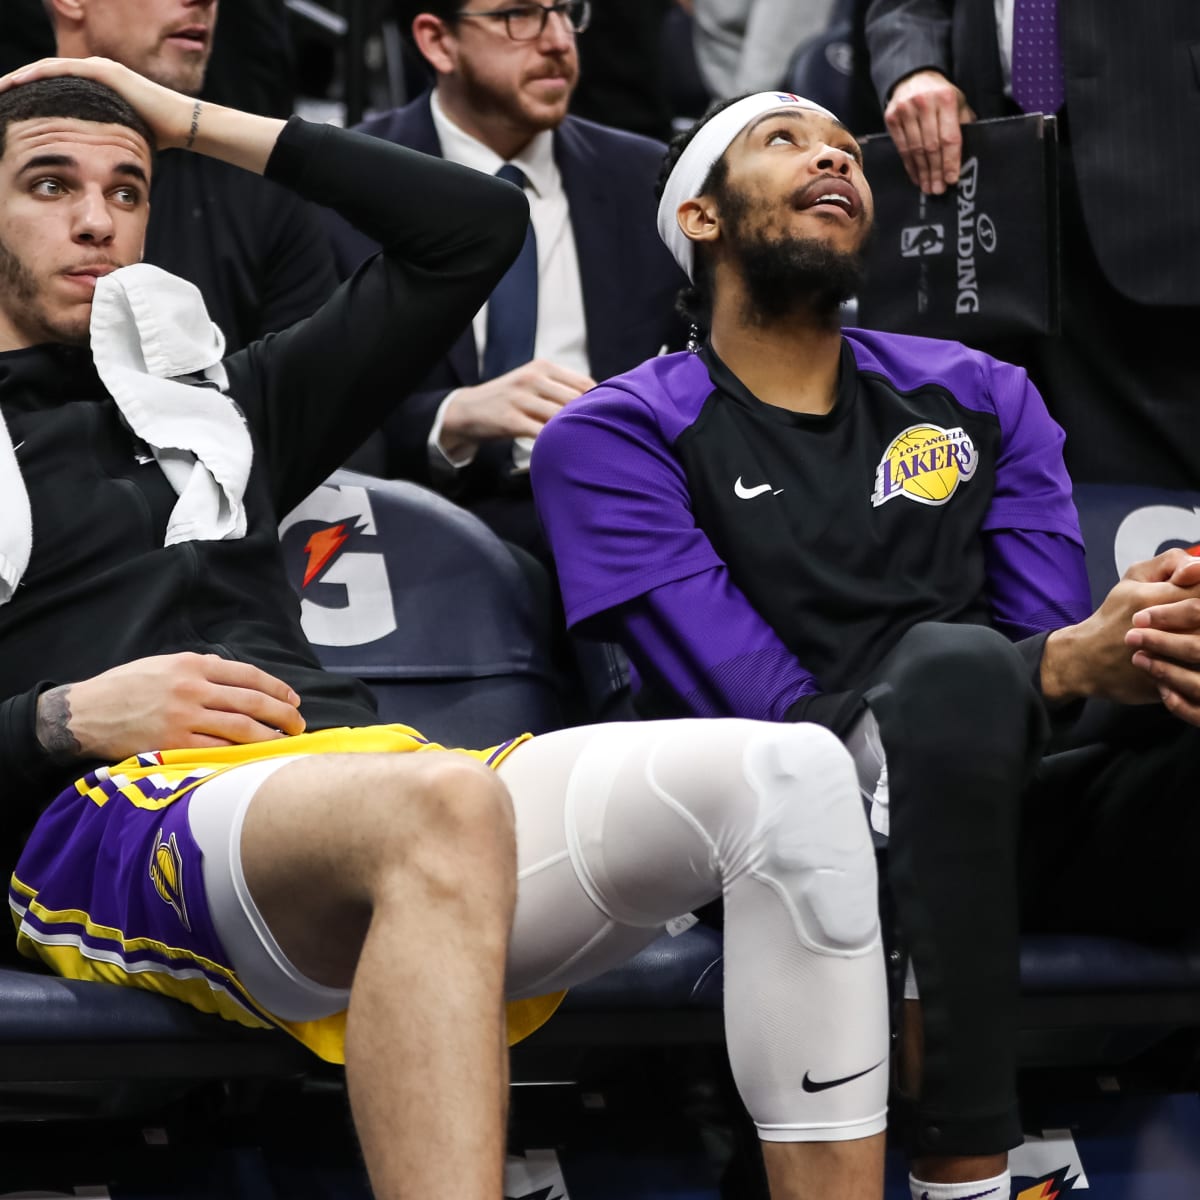 The 2022 first overall pick might be destined to join the Lakers